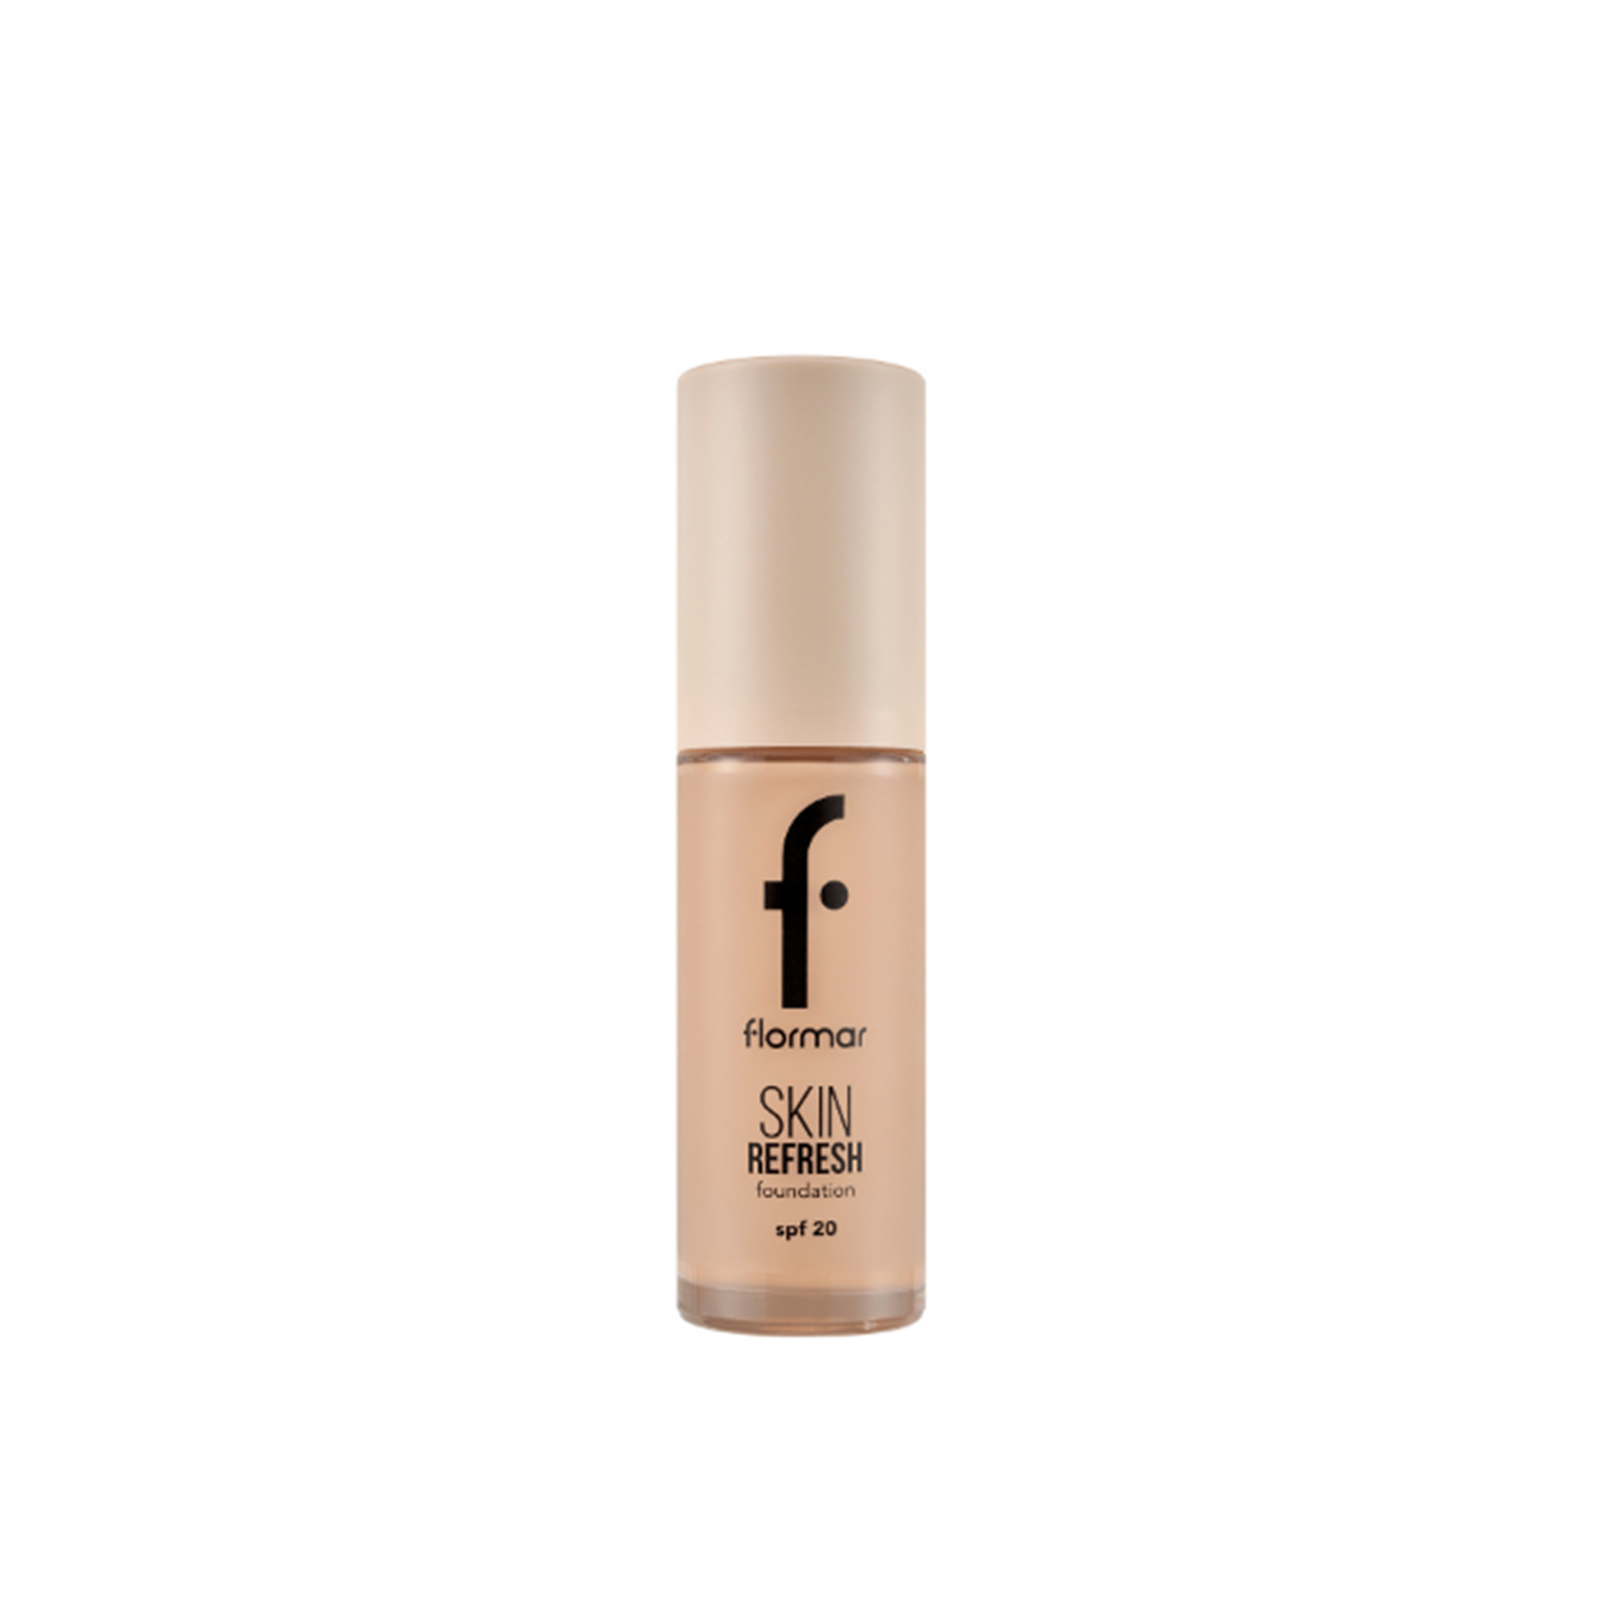 Pretty By Flormar Cover Up Foundation Ivory 004 price in Bahrain, Buy  Pretty By Flormar Cover Up Foundation Ivory 004 in Bahrain.